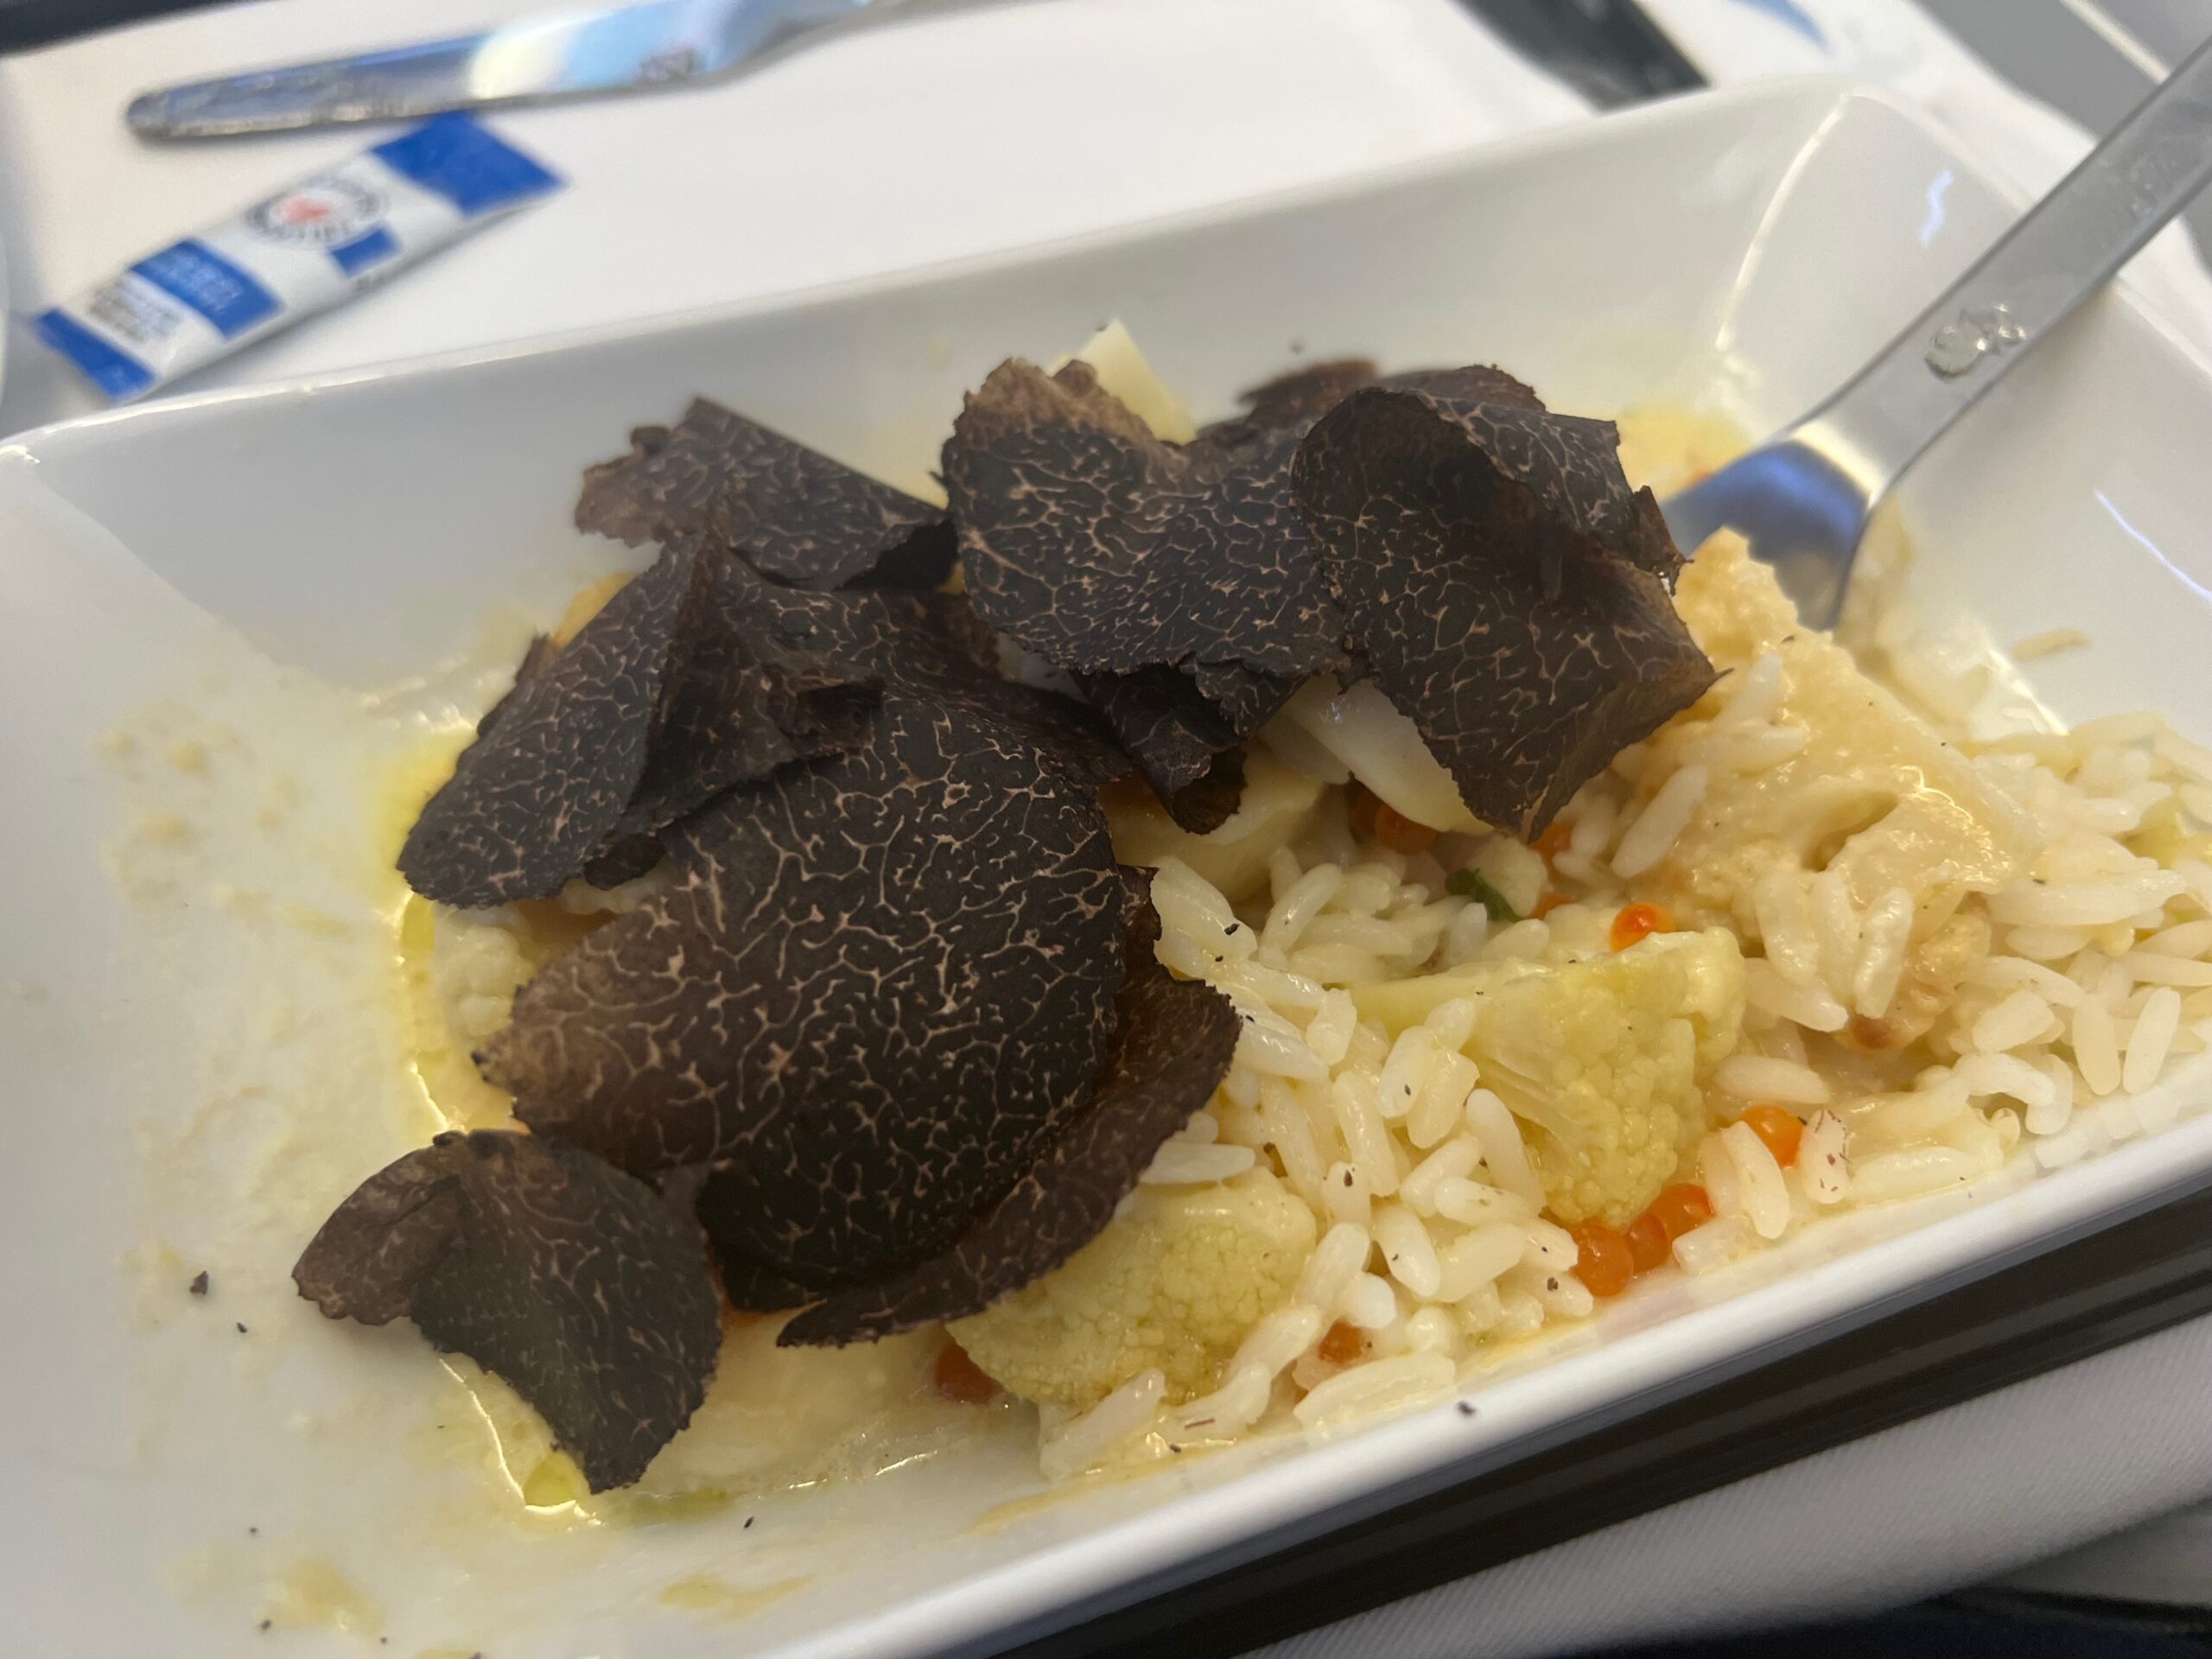 Flying on La Compagnie all-business class airline from Paris to New York &mdash; the dish with truffles on top.